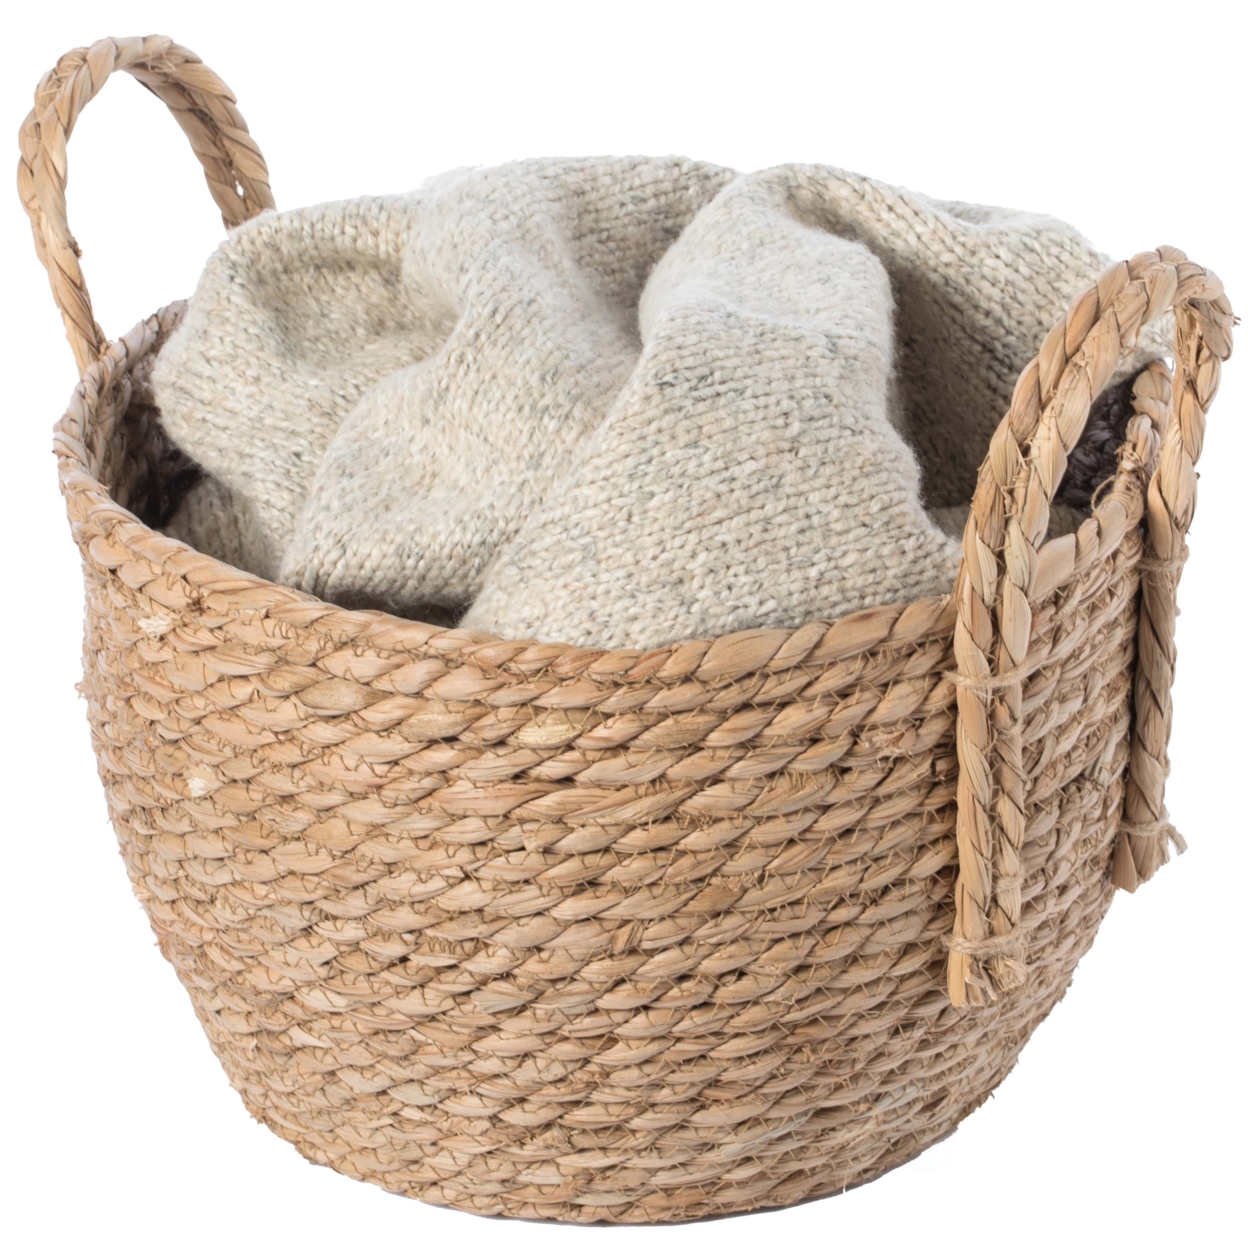 Decorative Round Wicker Woven Rope Storage Blanket Basket With Braided Handles - Small